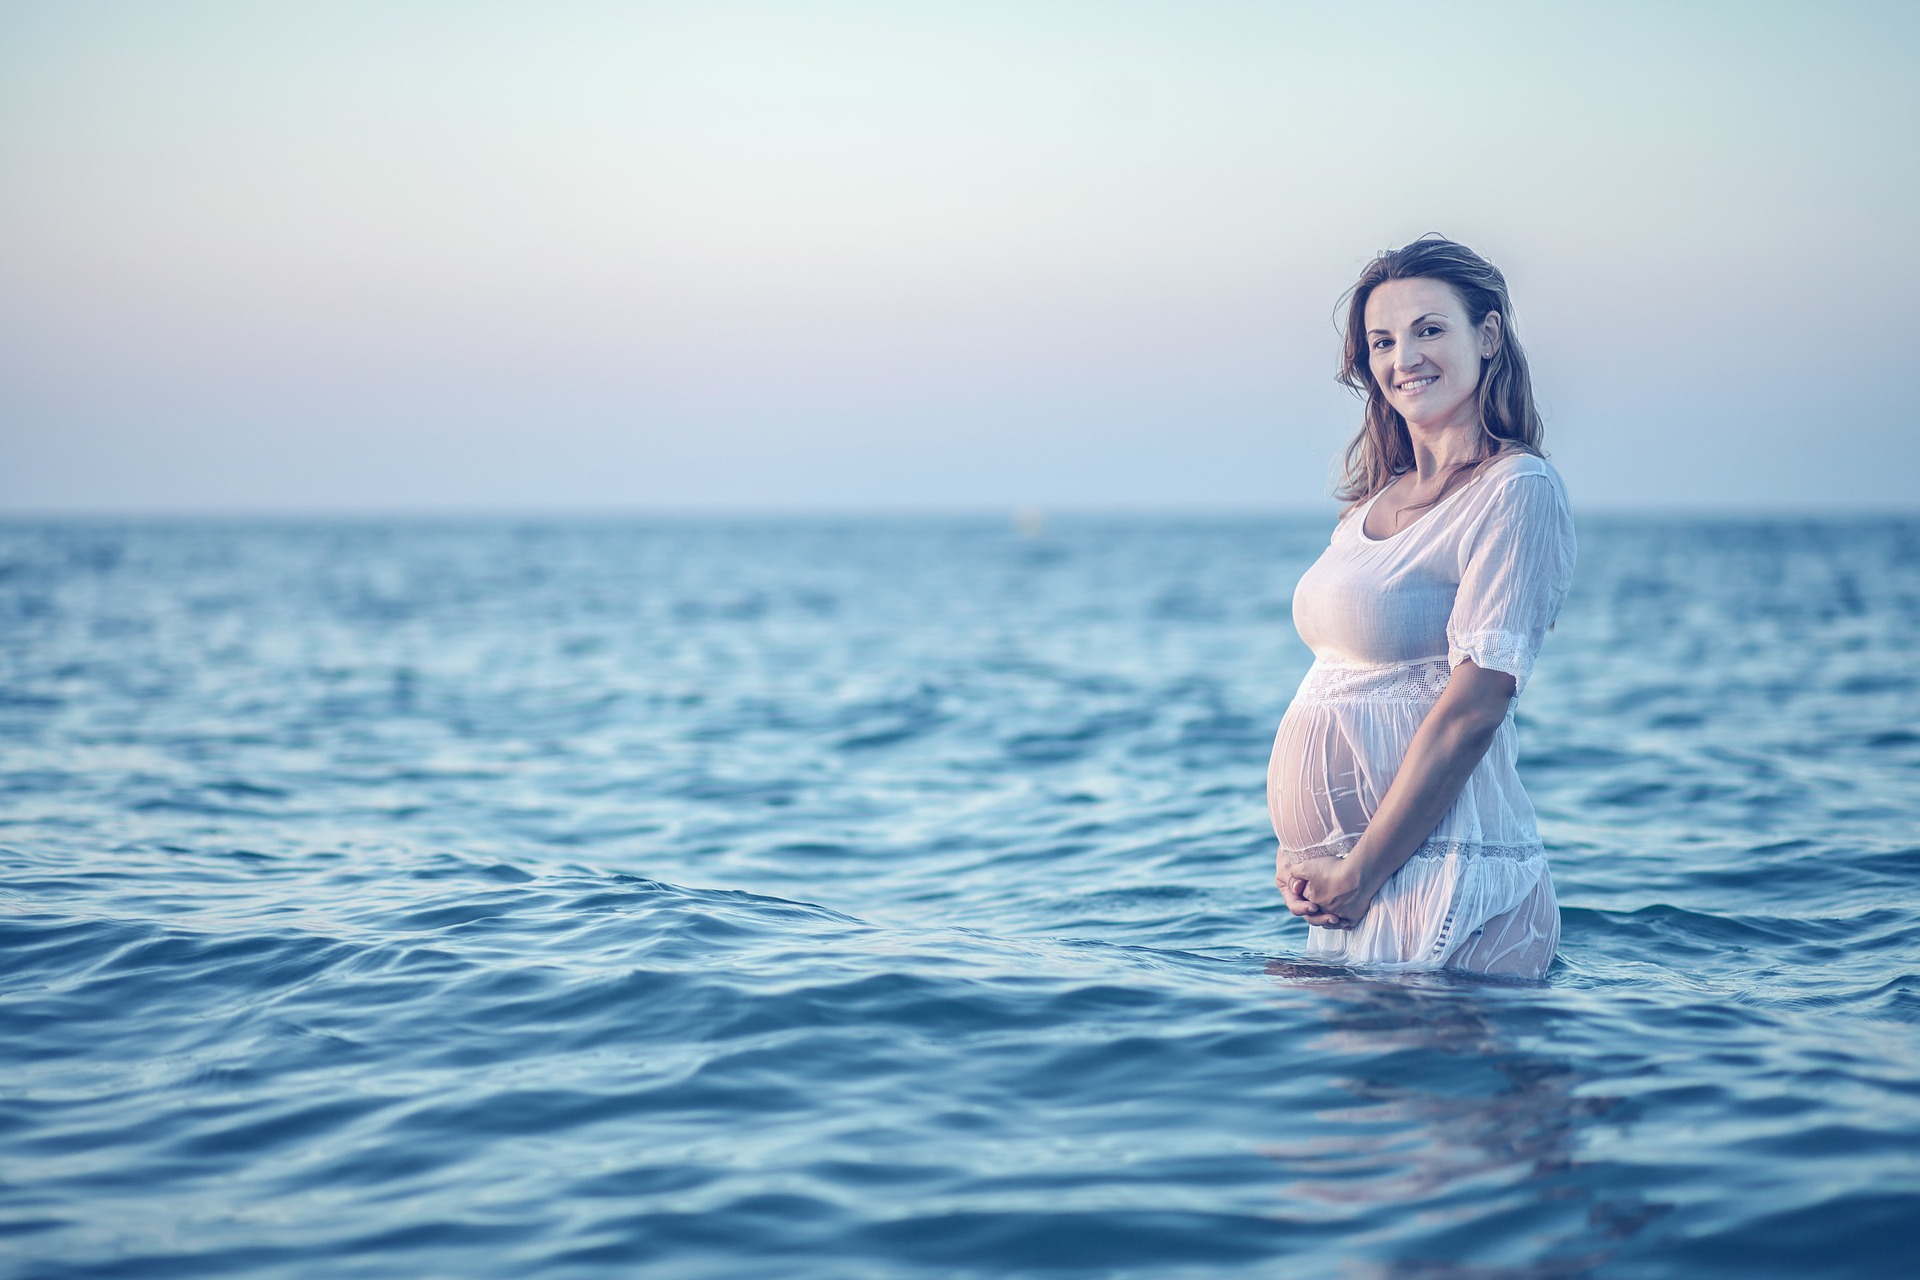 A pregnant woman in the sea: Can dolphins detect pregnancy?